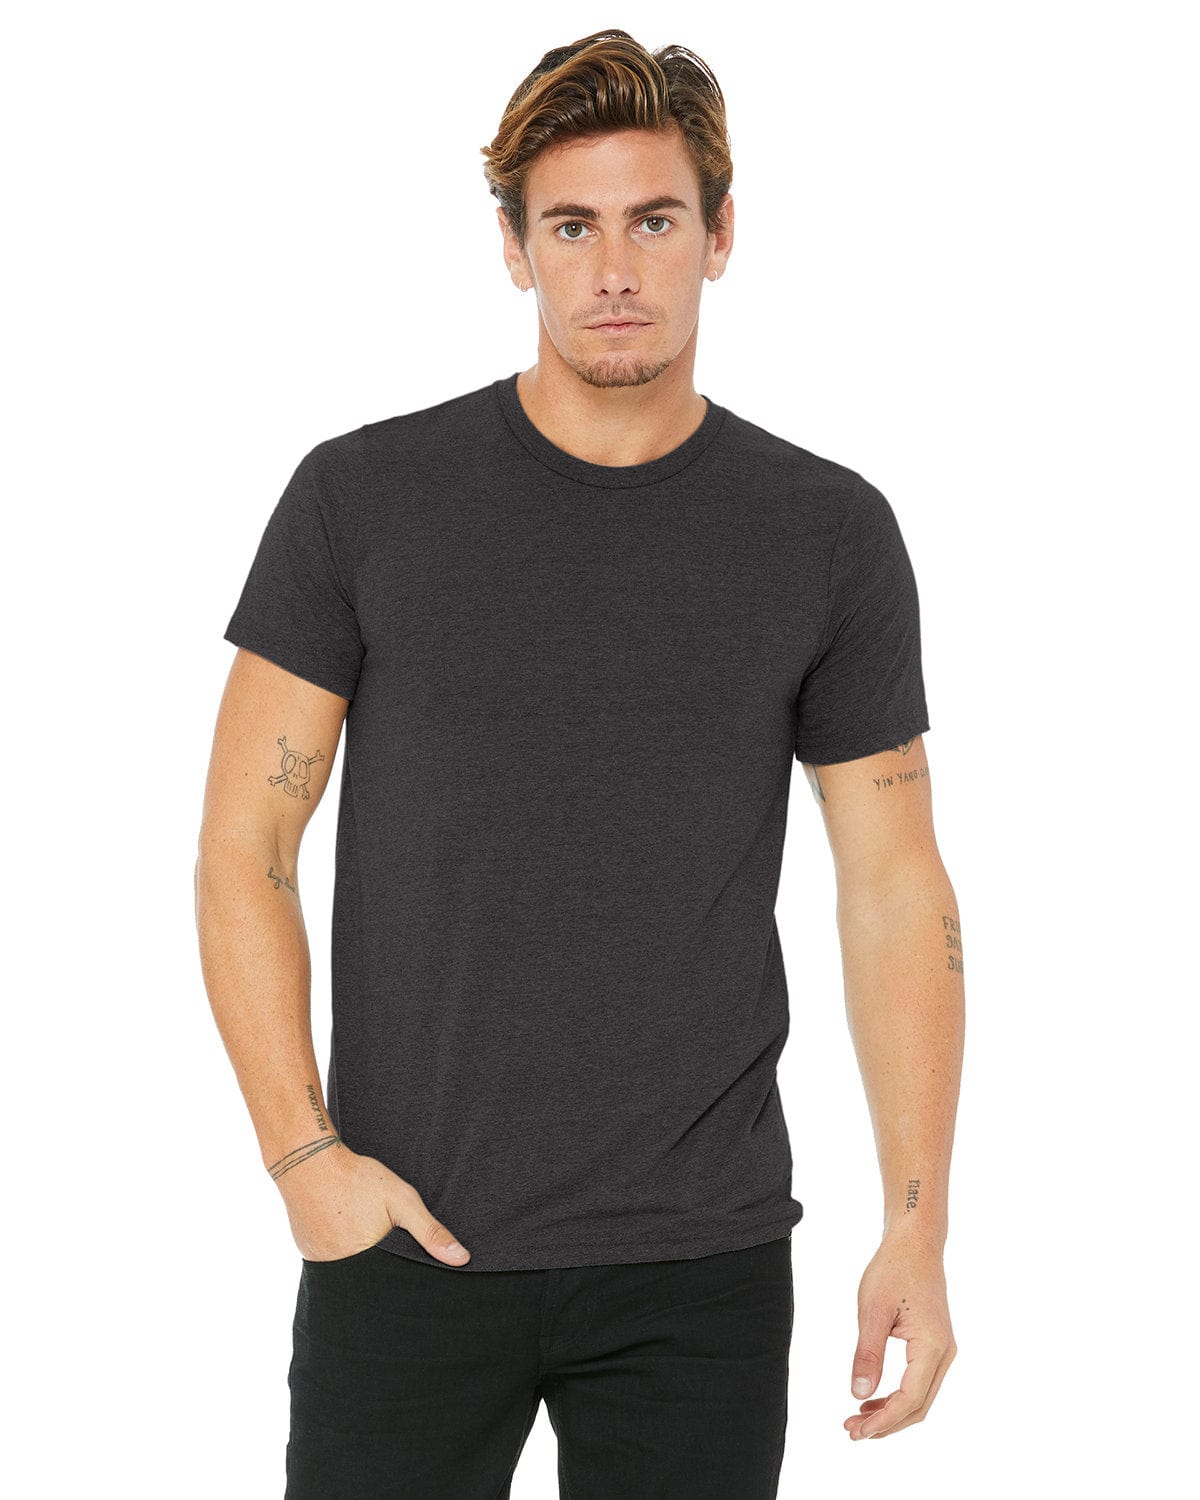 Bella+Canvas 3001U: Unisex Made In The USA Jersey T-Shirt